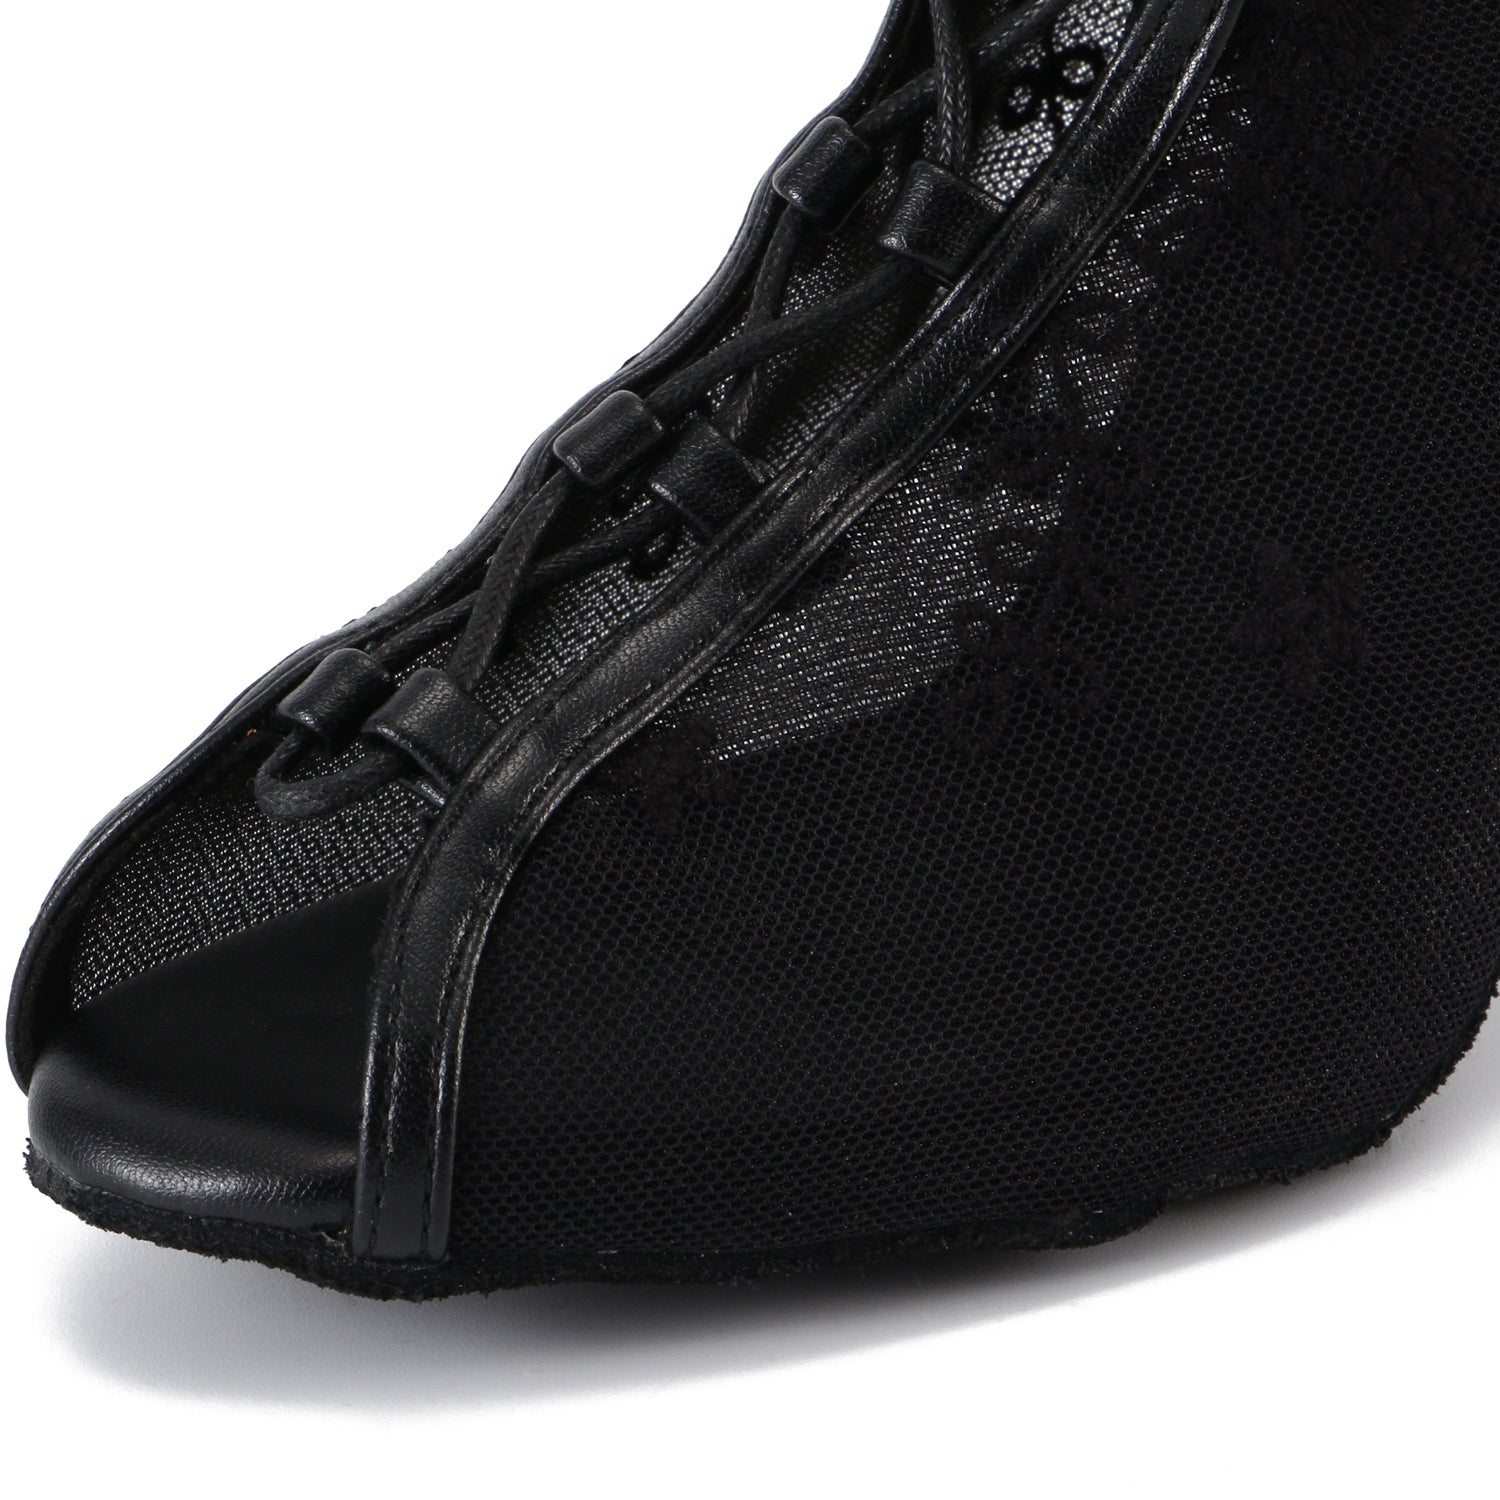 Pro Dancer Womens Ballroom Dance Bootie with High Heel and Suede or Rubber Sole (PD-B-003)8